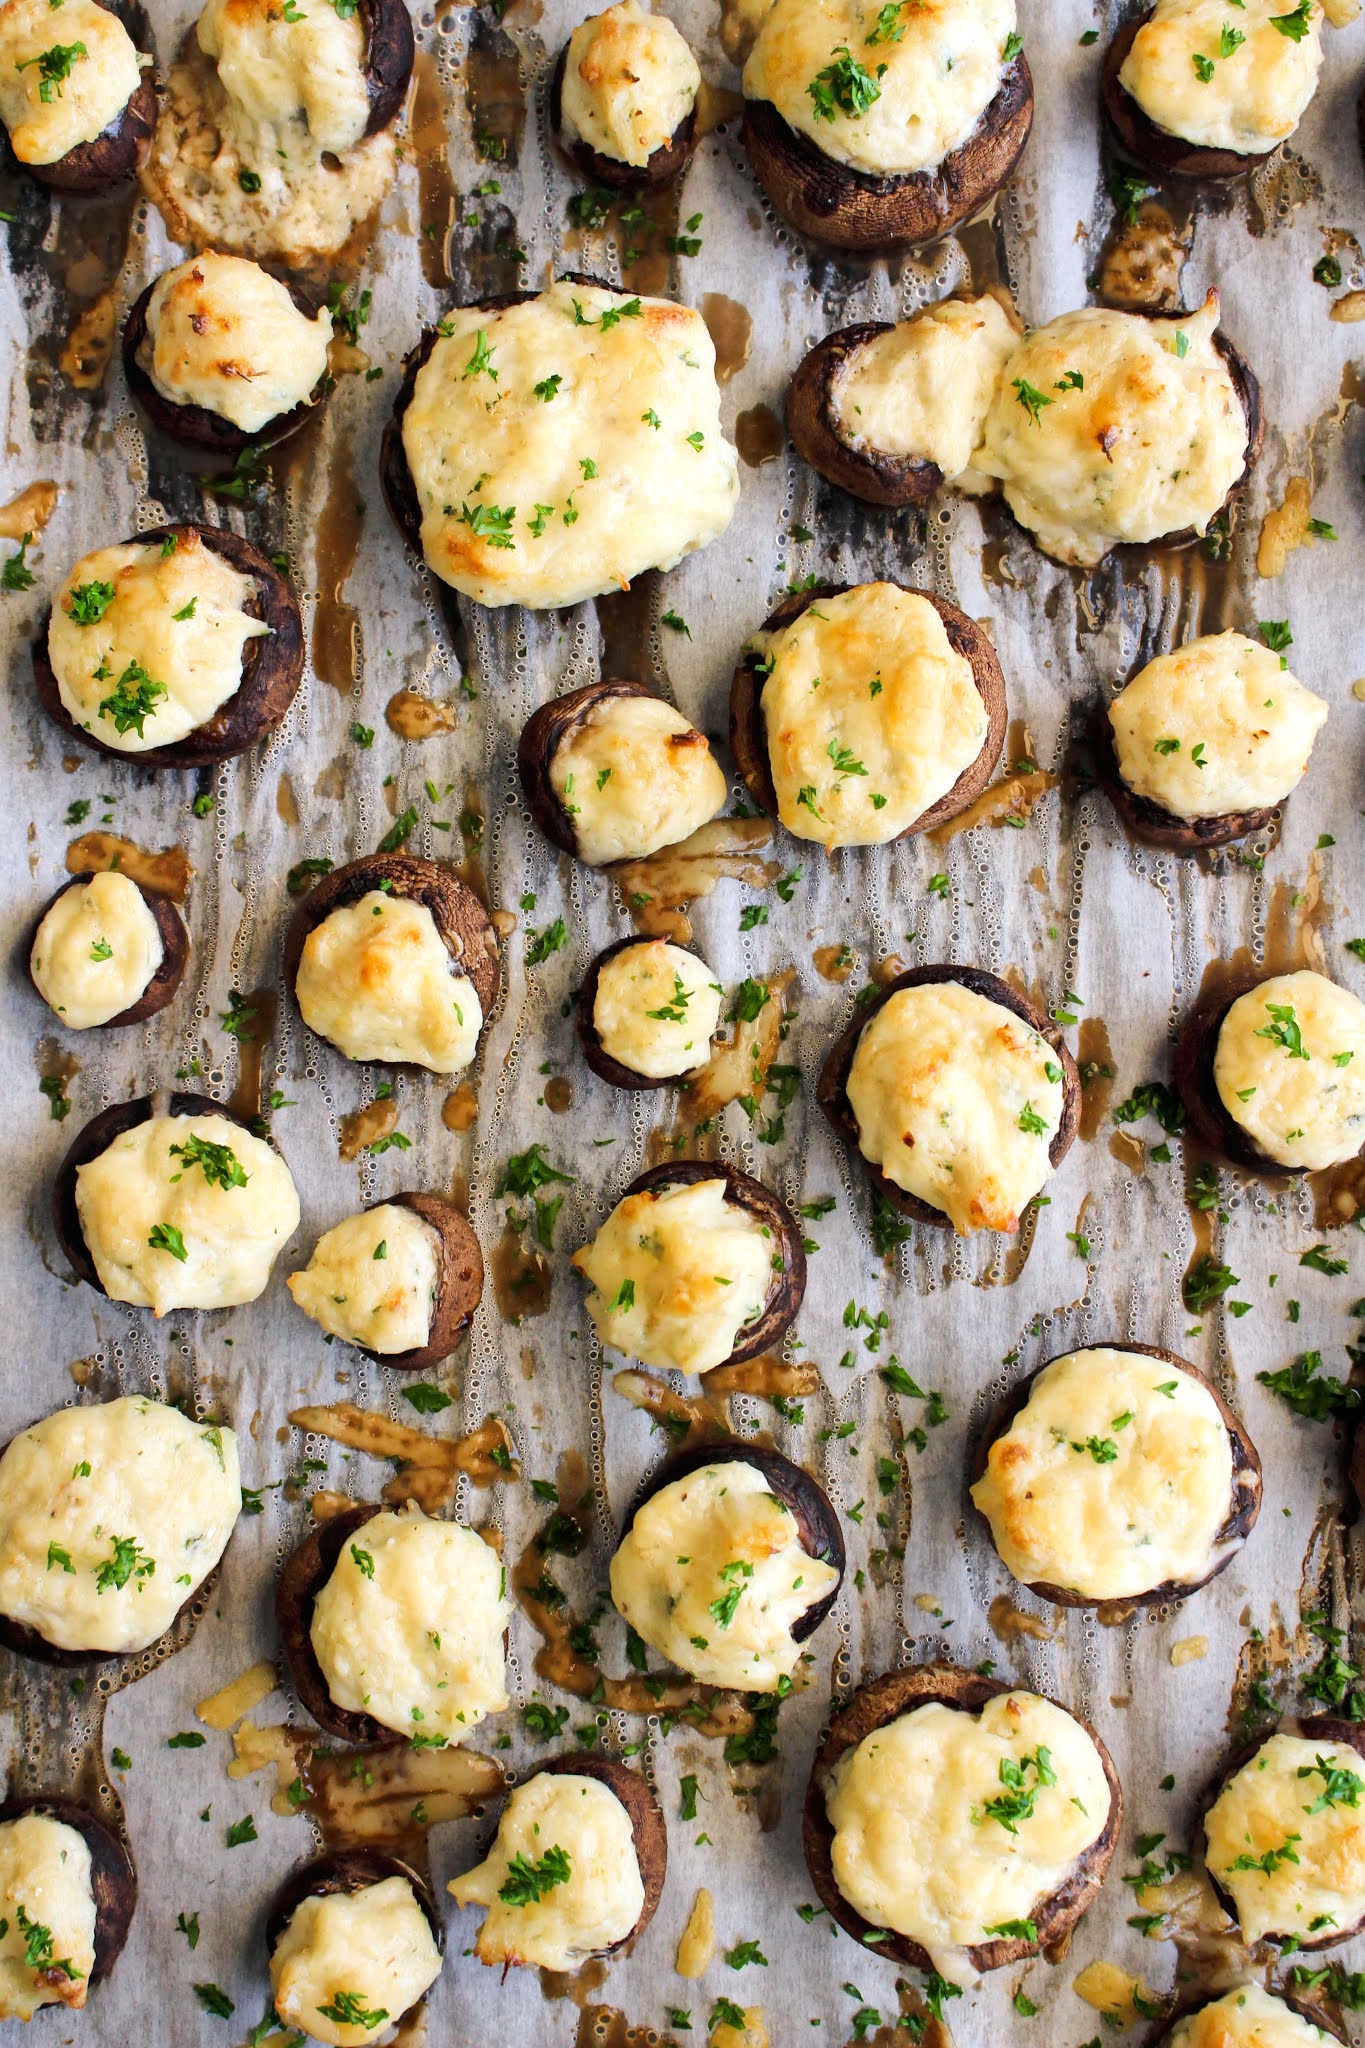 These are the best Crab and Cream Cheese Stuffed Mushrooms! They are elegant, yet easy to make and perfect for any occasion. Try them on Thanksgiving or Christmas! #stuffedmushrooms #crab #appetizer